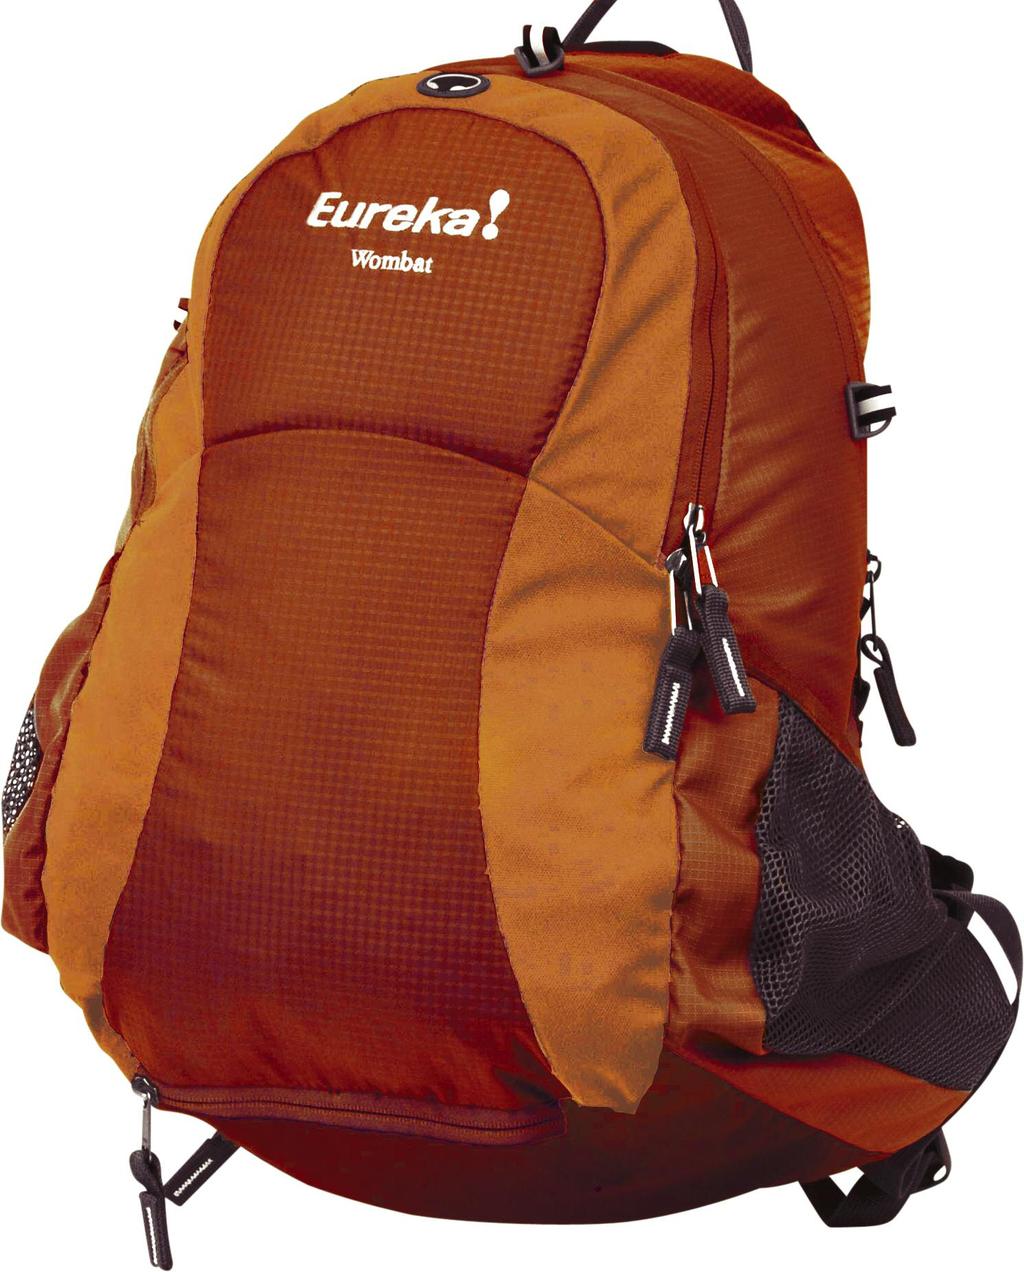 , Capacity: 20L Wombat Multi use daypack which can as easily be used for trips to school as for mountain